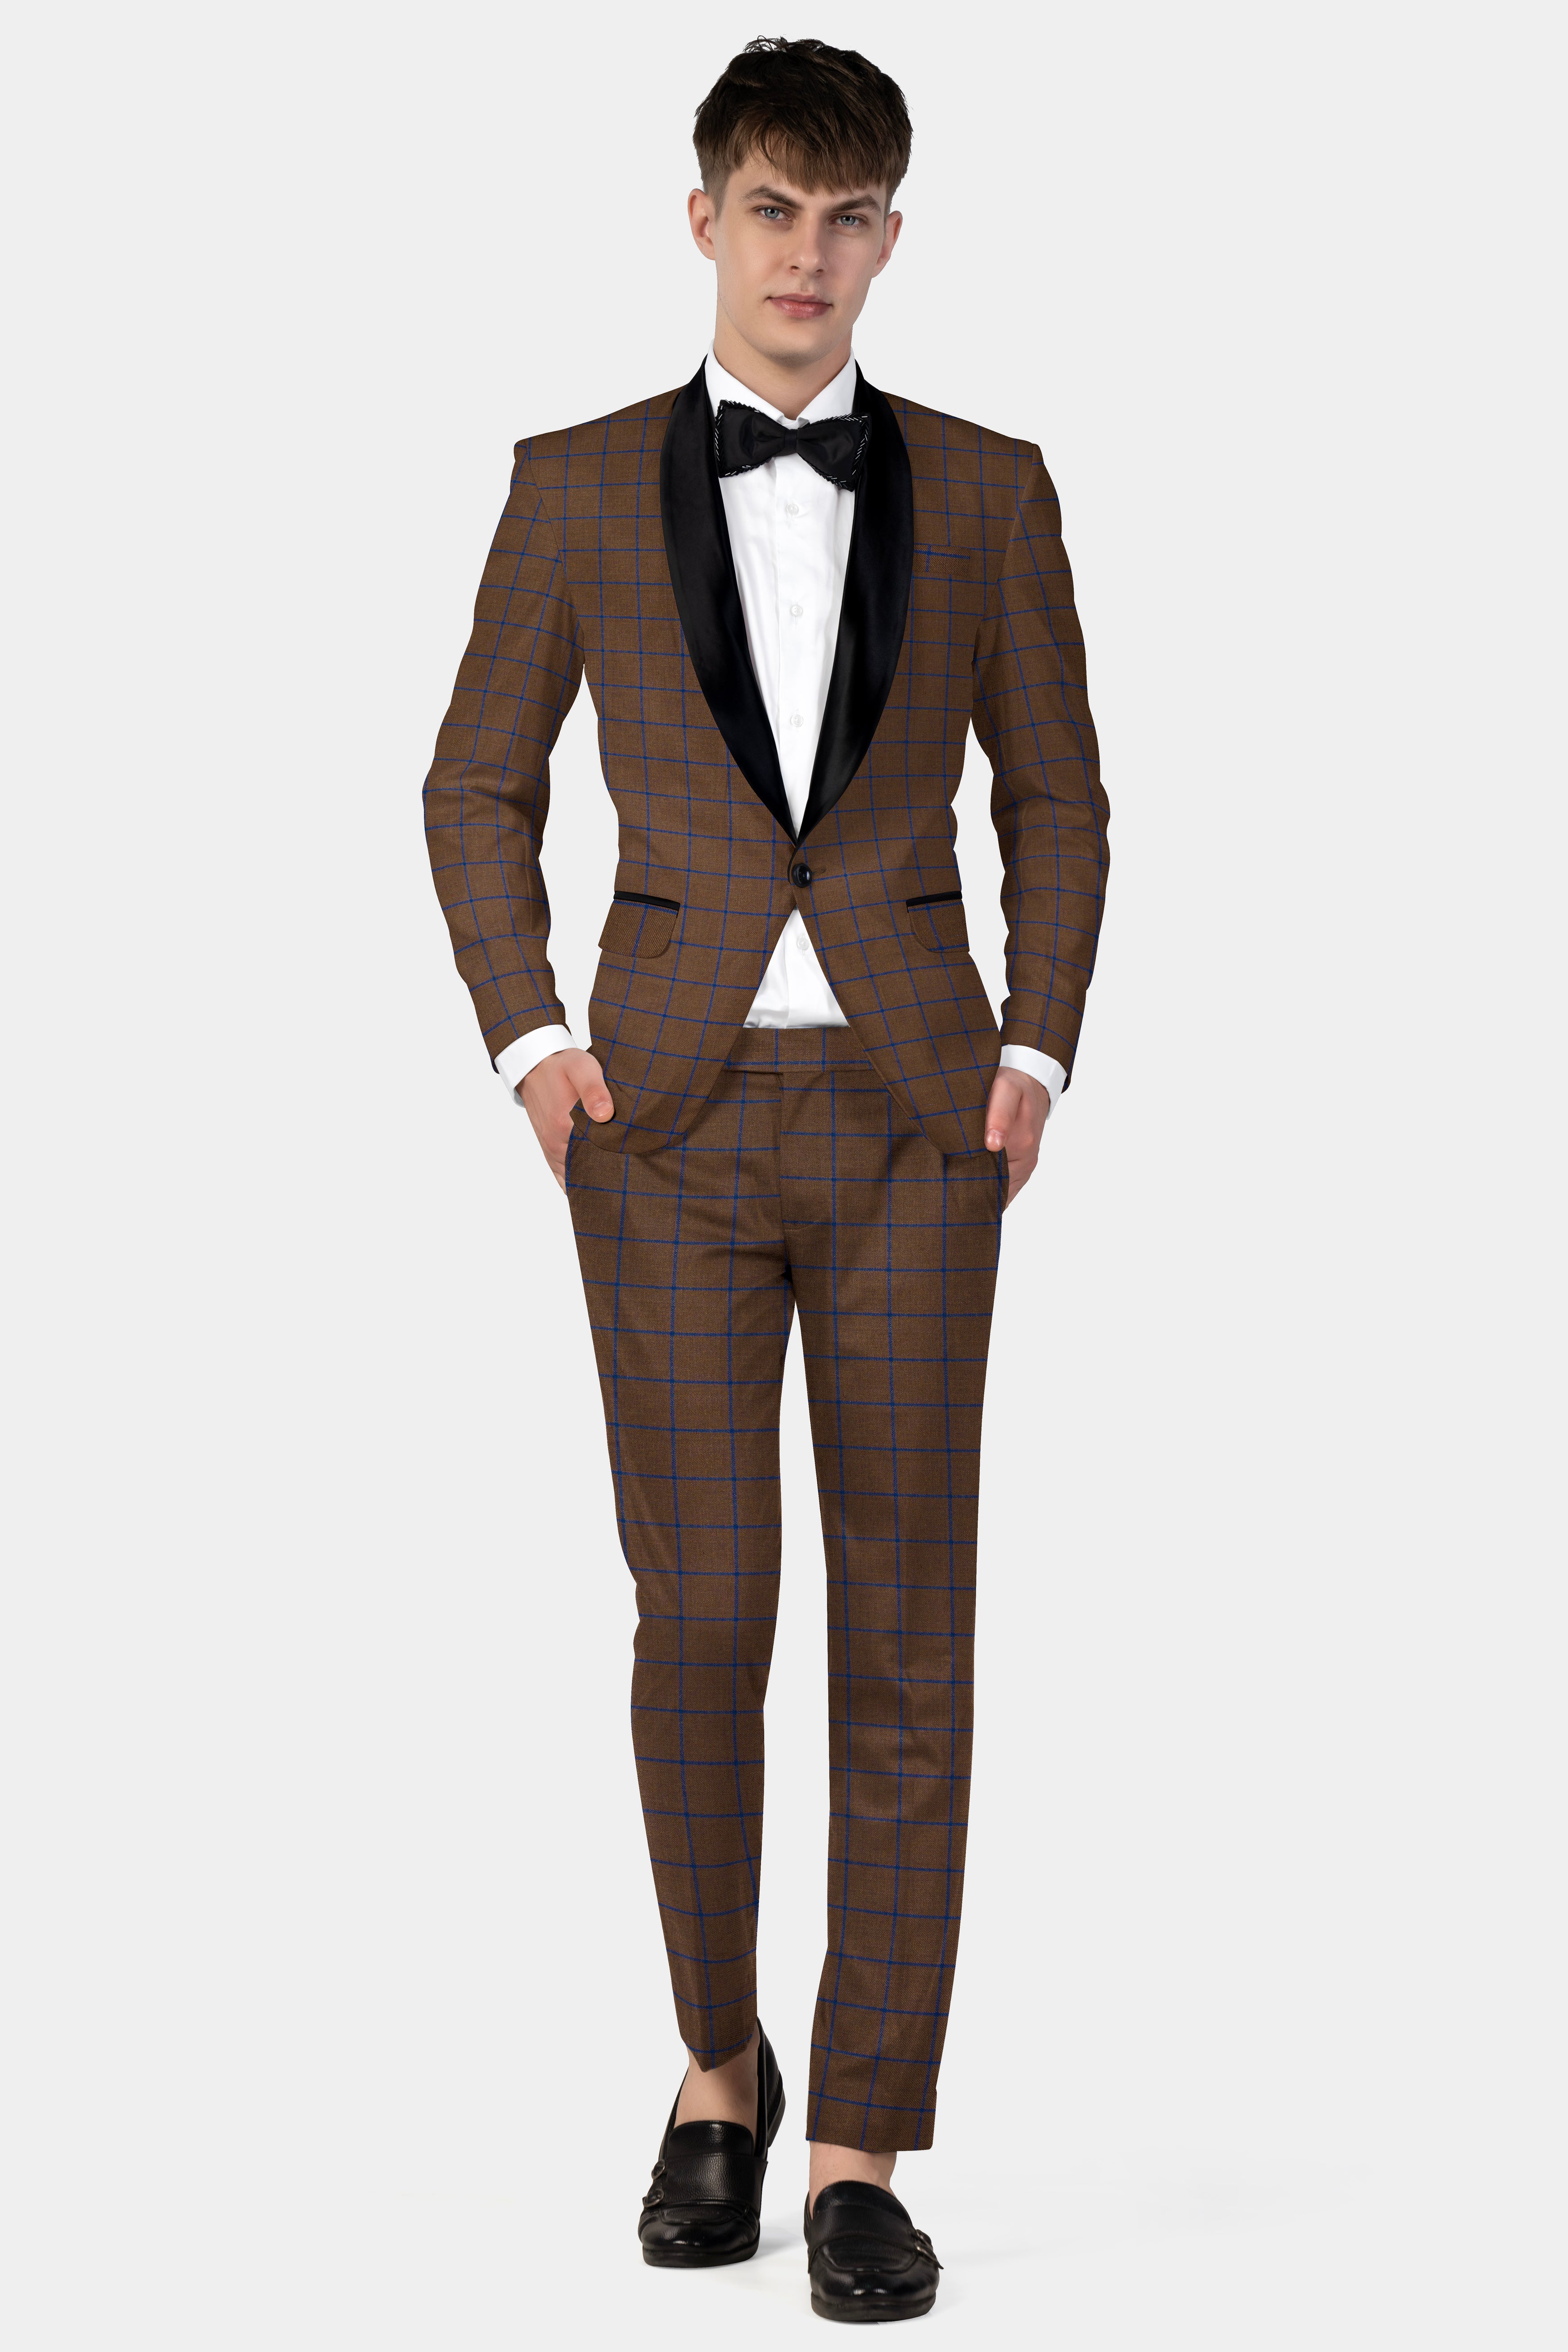 Bistre Brown with Catalina Blue Windowpane Pant